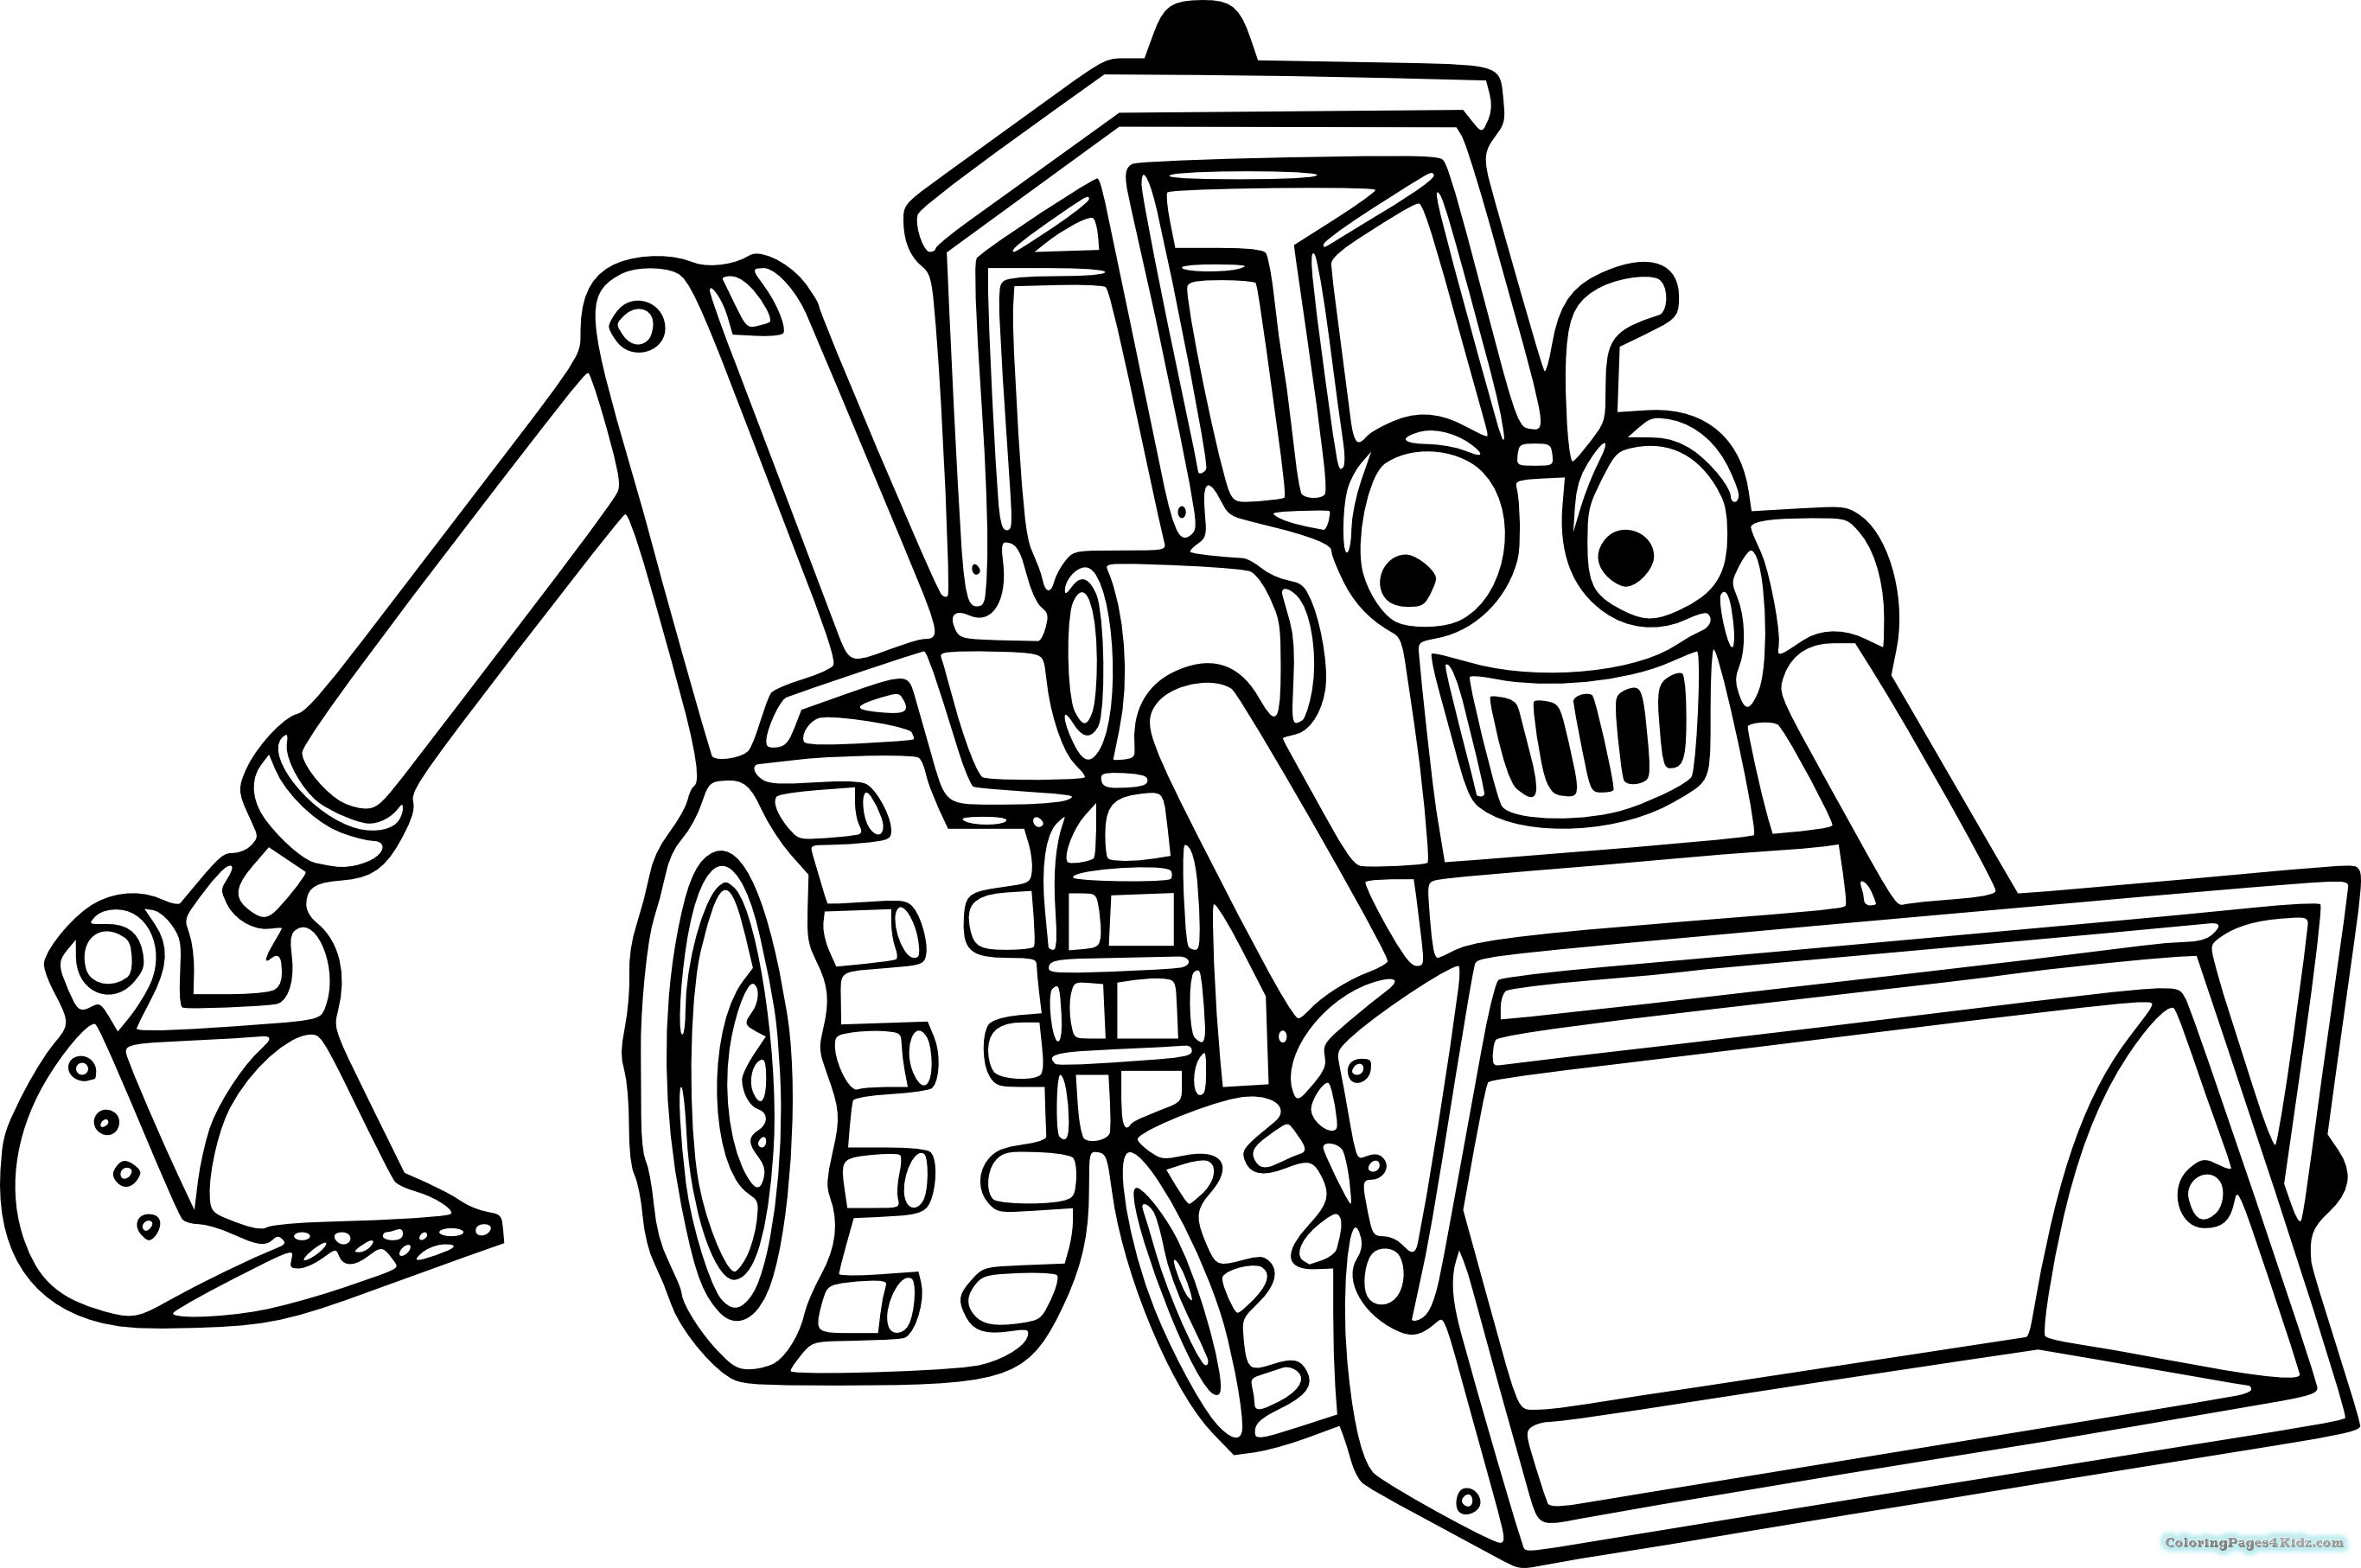 Tractor Coloring Pages For Toddlers
 Johnny Tractor Free Coloring Pages